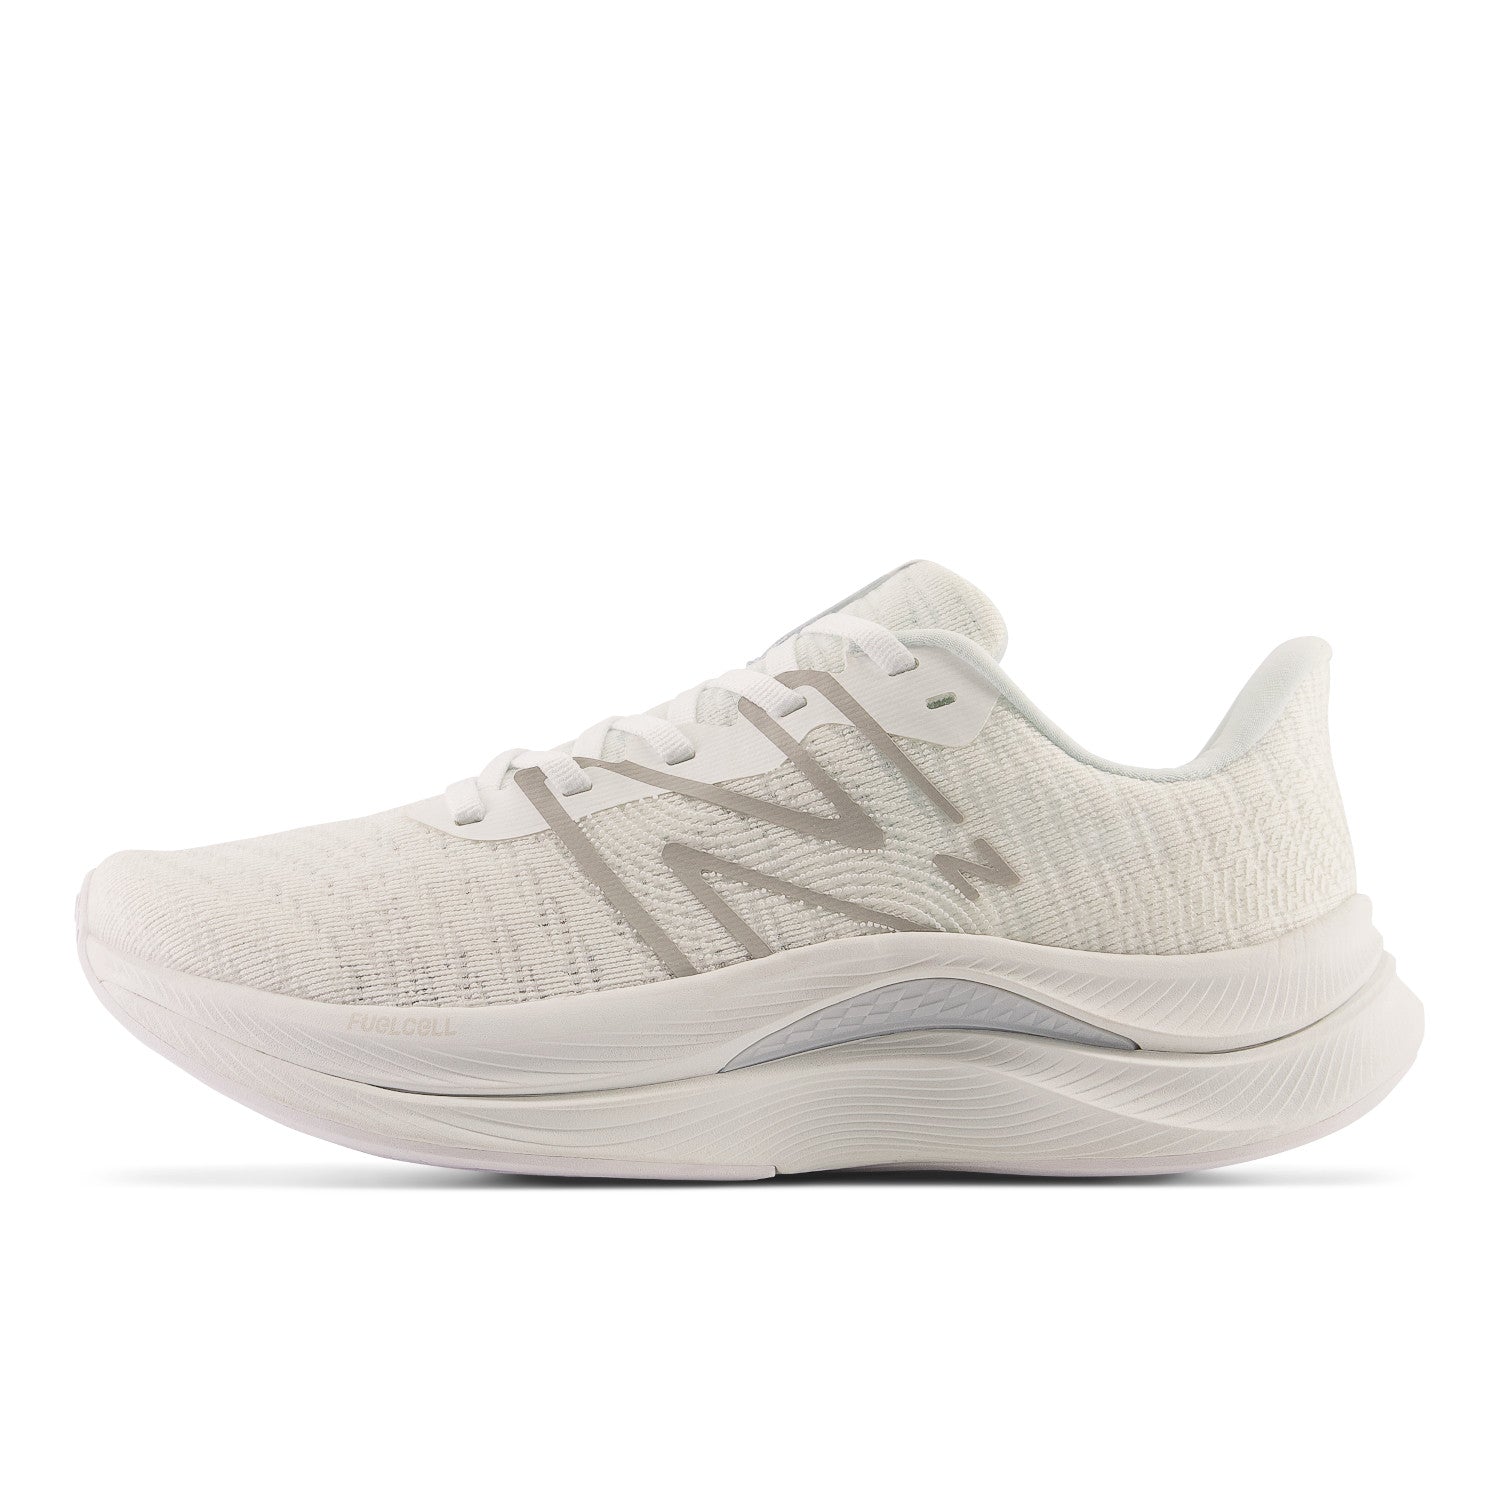 New Balance FuelCell Propel WFCPRLW4 Women's 